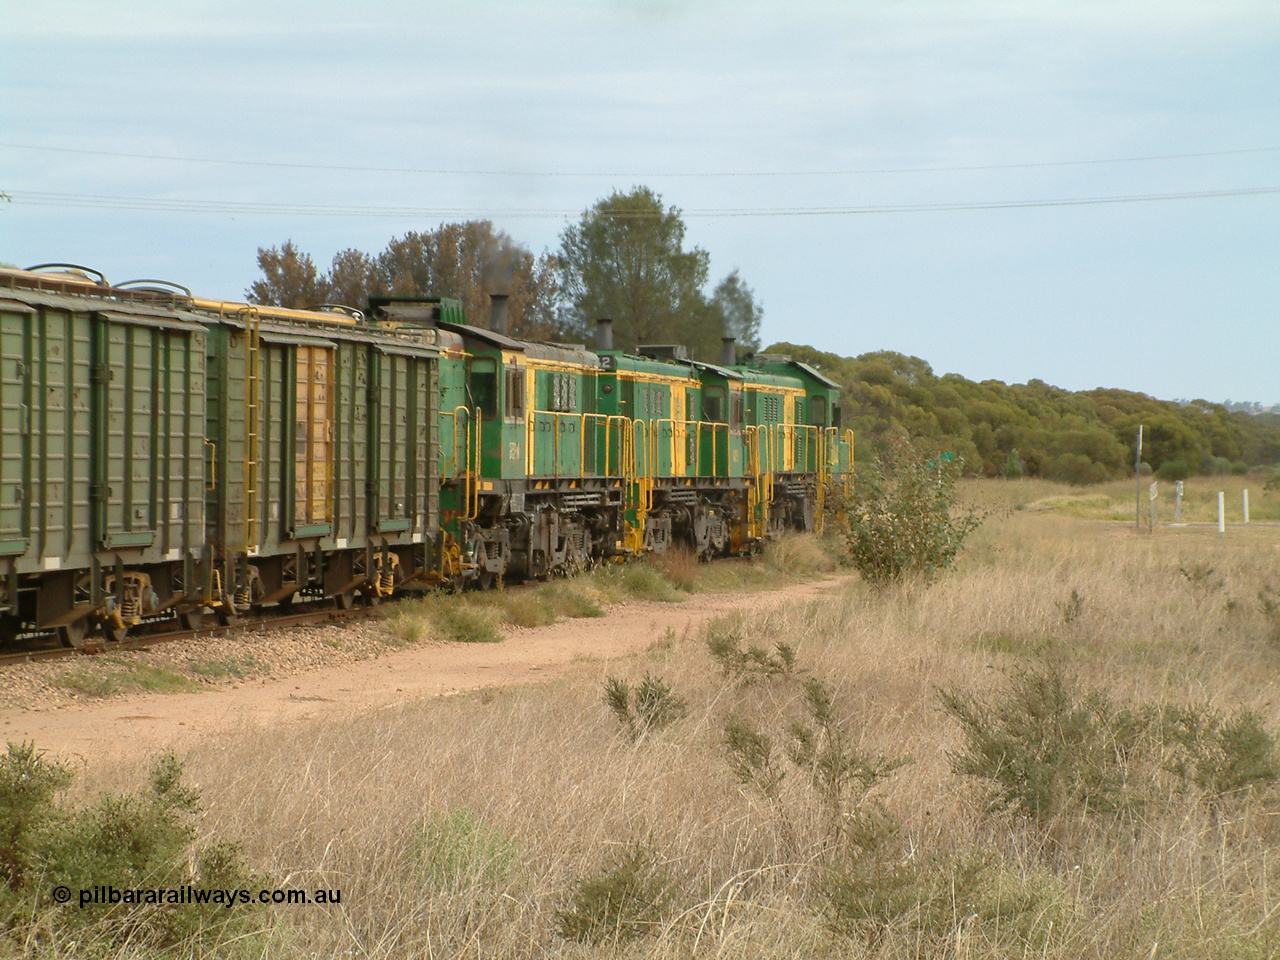 030407 082321
Wudinna, empty grain train shunts forward with a trio of former Australian National locomotives with rebuilt former AE Goodwin ALCo model DL531 830 class ex 839, serial 83730, rebuilt by Port Augusta Workshops to DA class, DA 4 leading two AE Goodwin ALCo model DL531 830 class units 842, serial 84140 and 851 serial 84137, 851 having been on the Eyre Peninsula since delivered in 1962, to shunt off empty waggons into the grain siding. 7th April 2003.
Keywords: DA-class;DA4;83730;Port-Augusta-WS;ALCo;DL531G/1;830-class;839;rebuild;